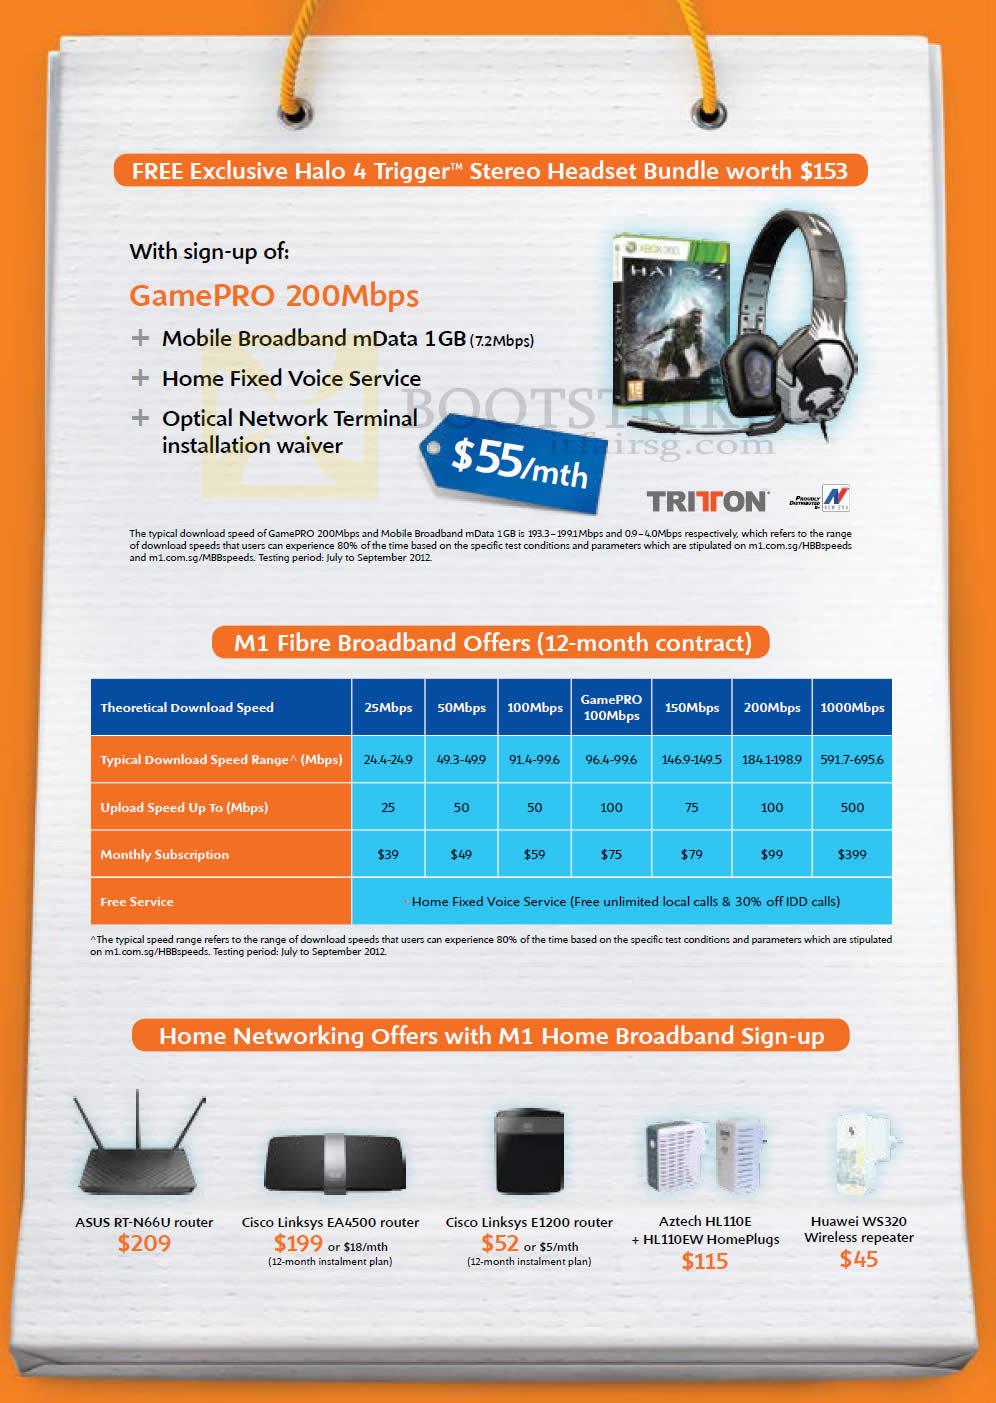 SITEX 2012 price list image brochure of M1 Fibre Broadband GamePro 200Mbps, Fixed Line, Mobile Broadband, Routers, HomePlugs, Repeater